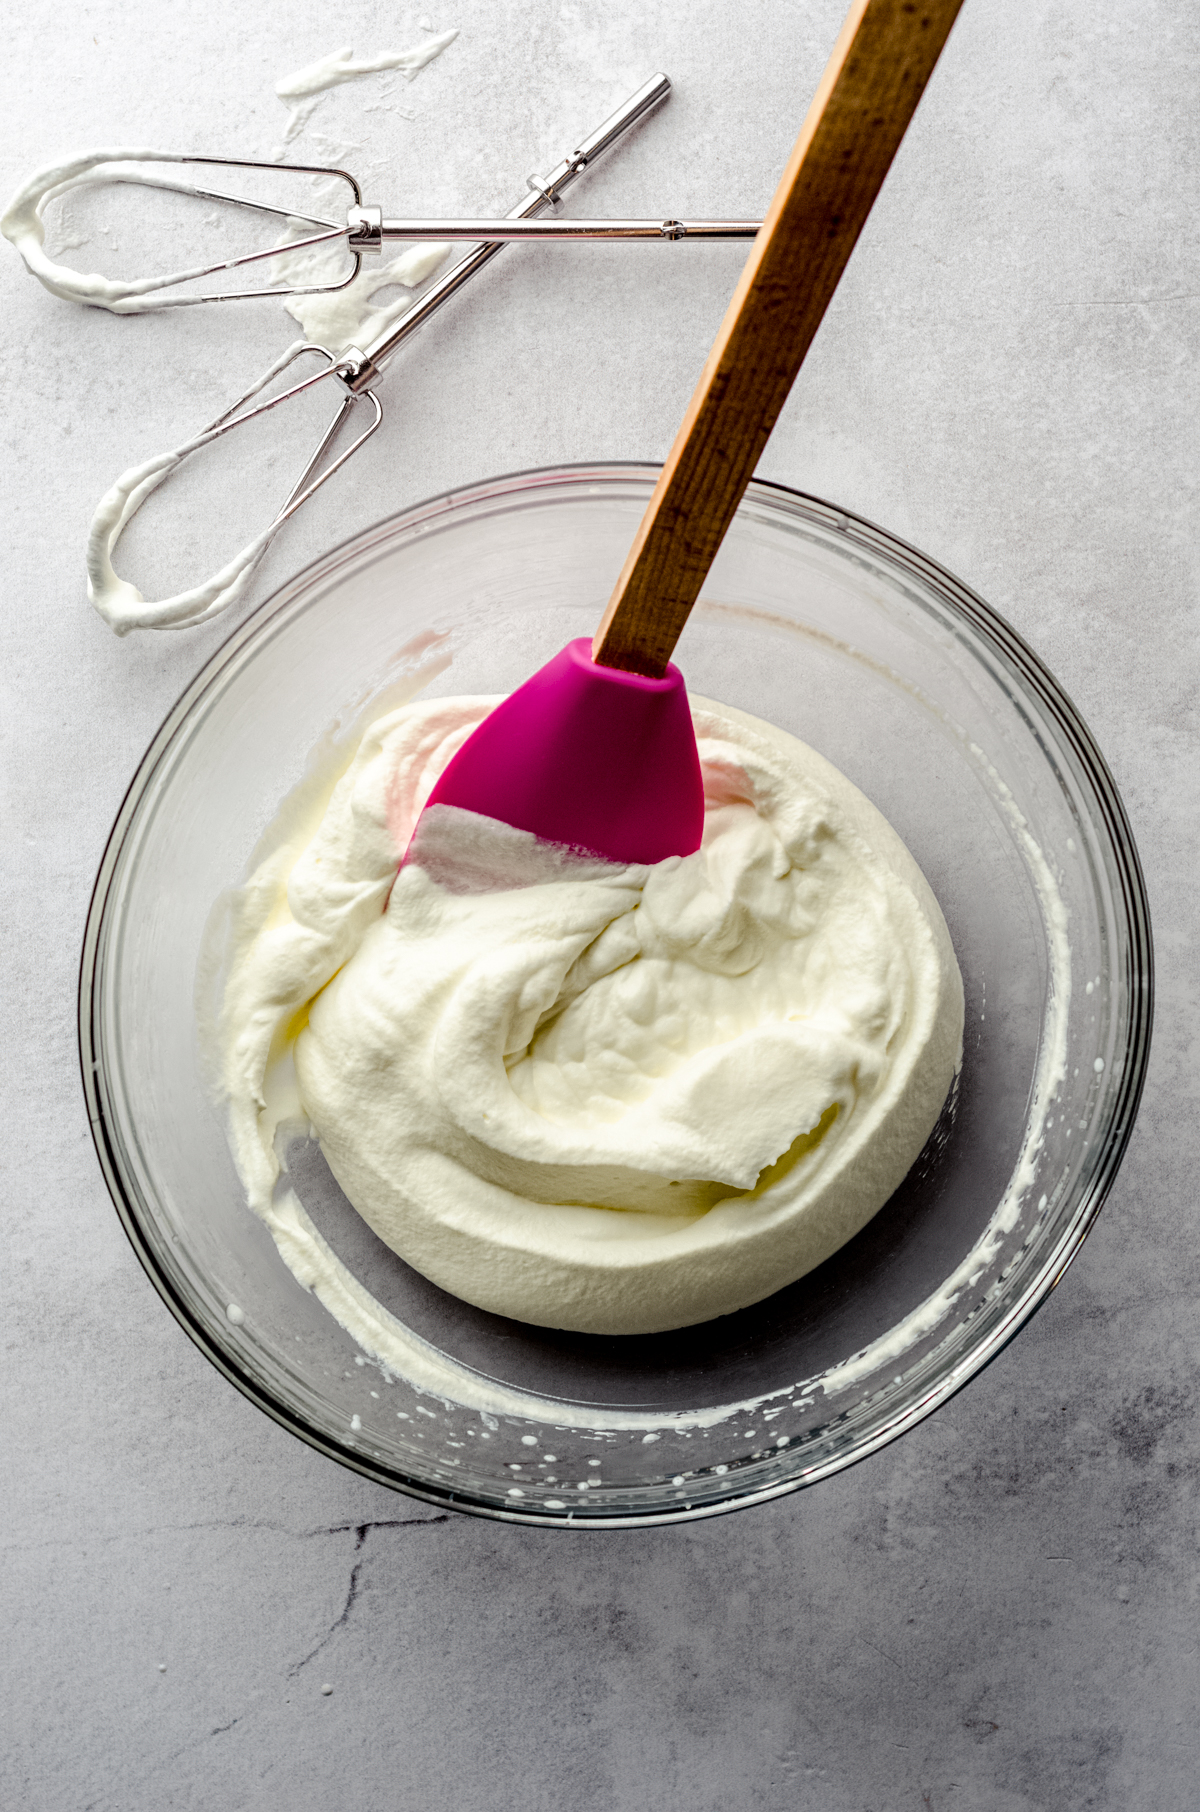 Aerial photo of a bowl of whipped cream with a pink spatula in it.